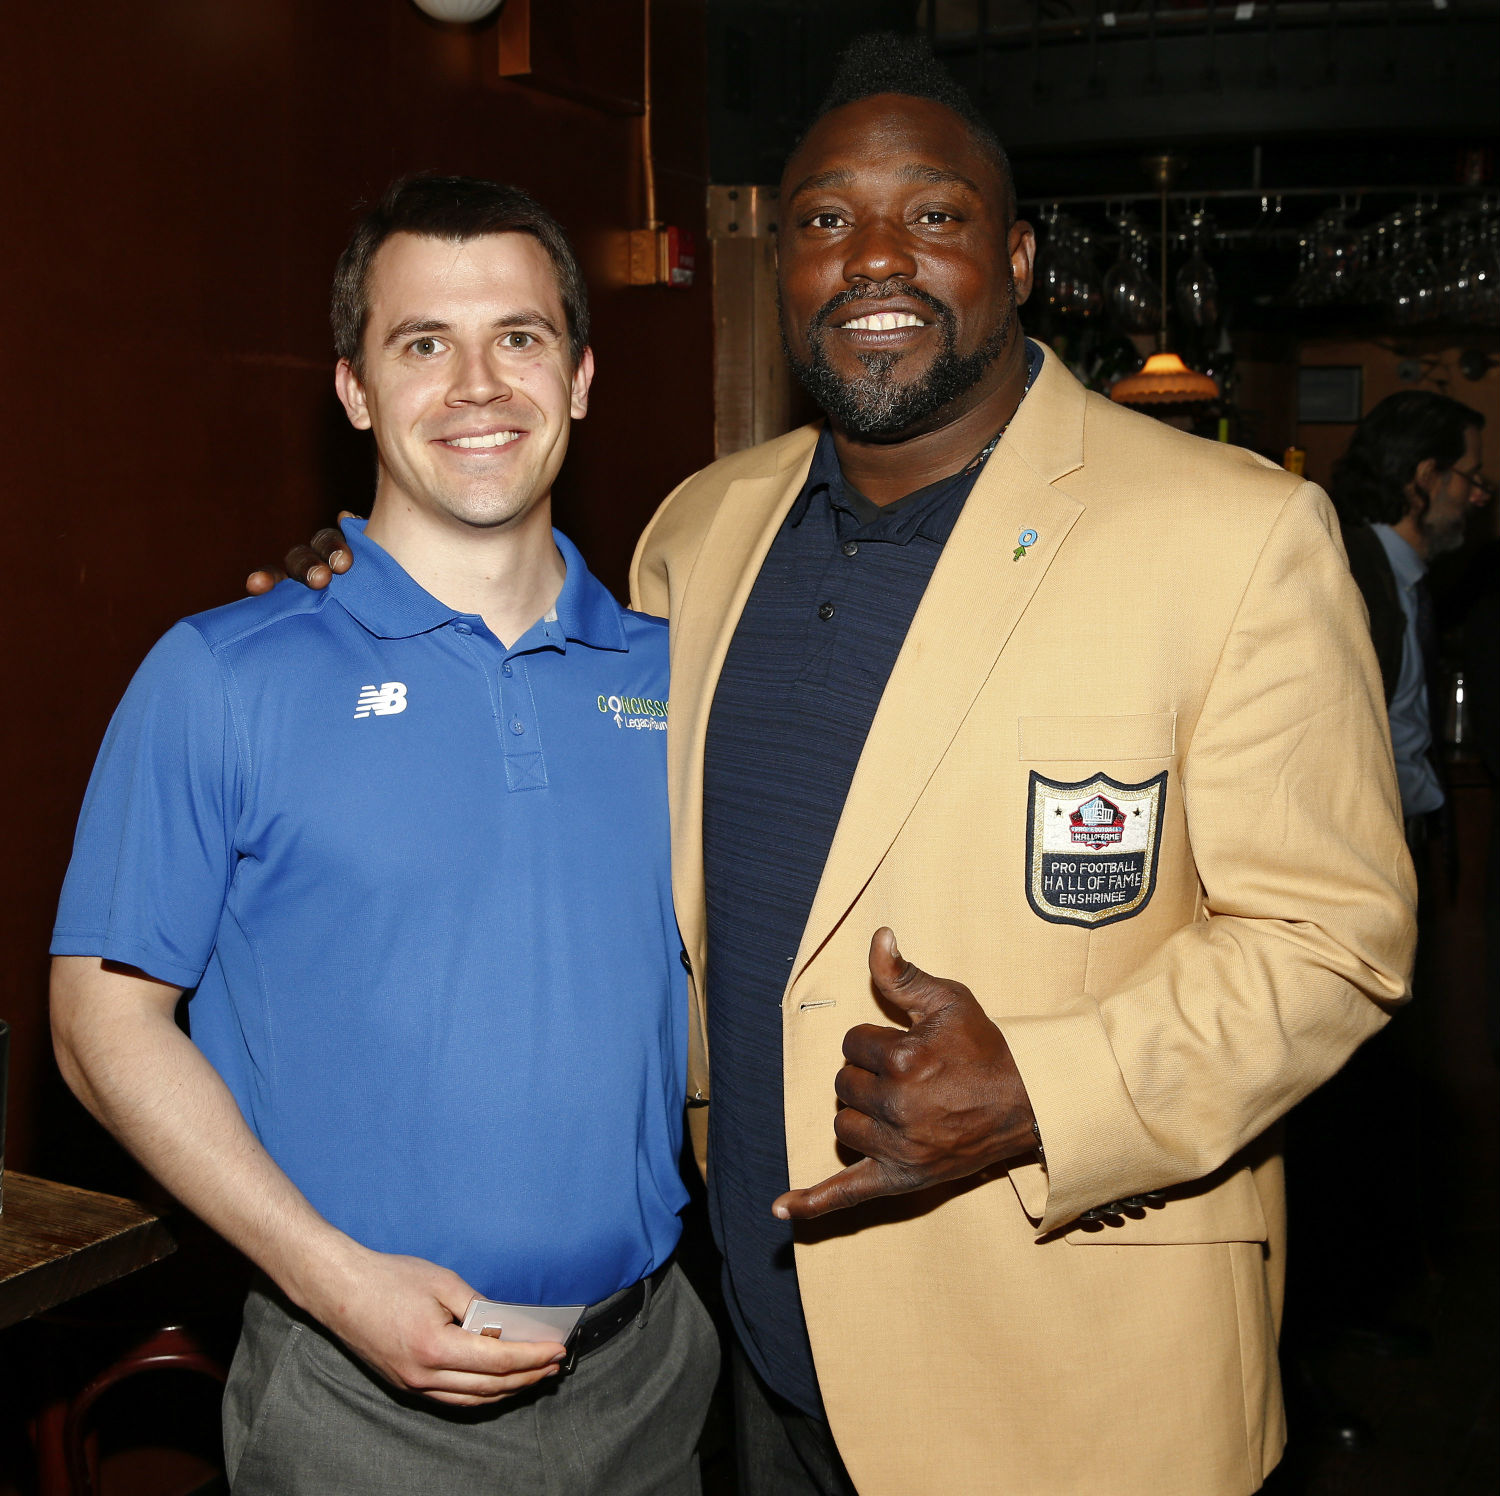 Foundation Director of Marketing and Communications Tyler Maland with Pro Football Hall of Famer Warren Sapp.